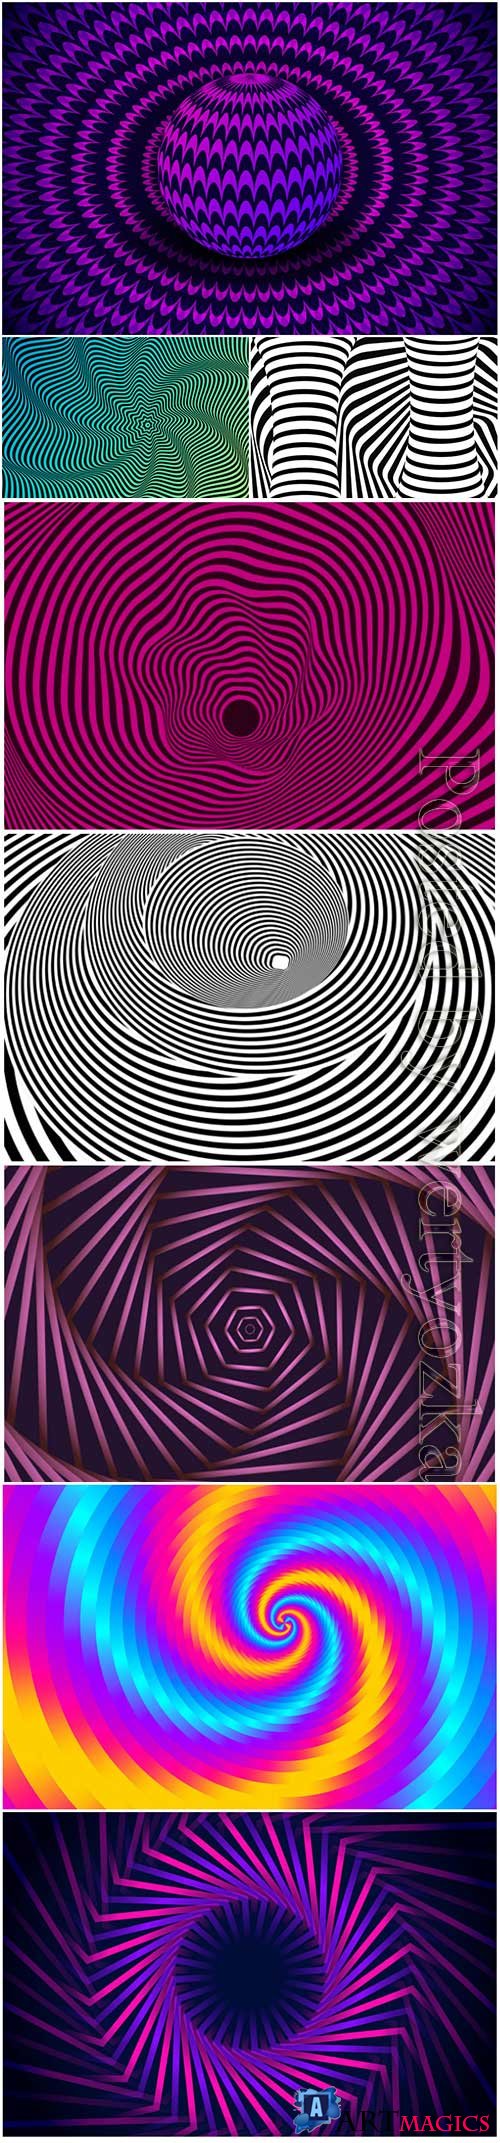 Psychedelic optical illusion vector background # 10